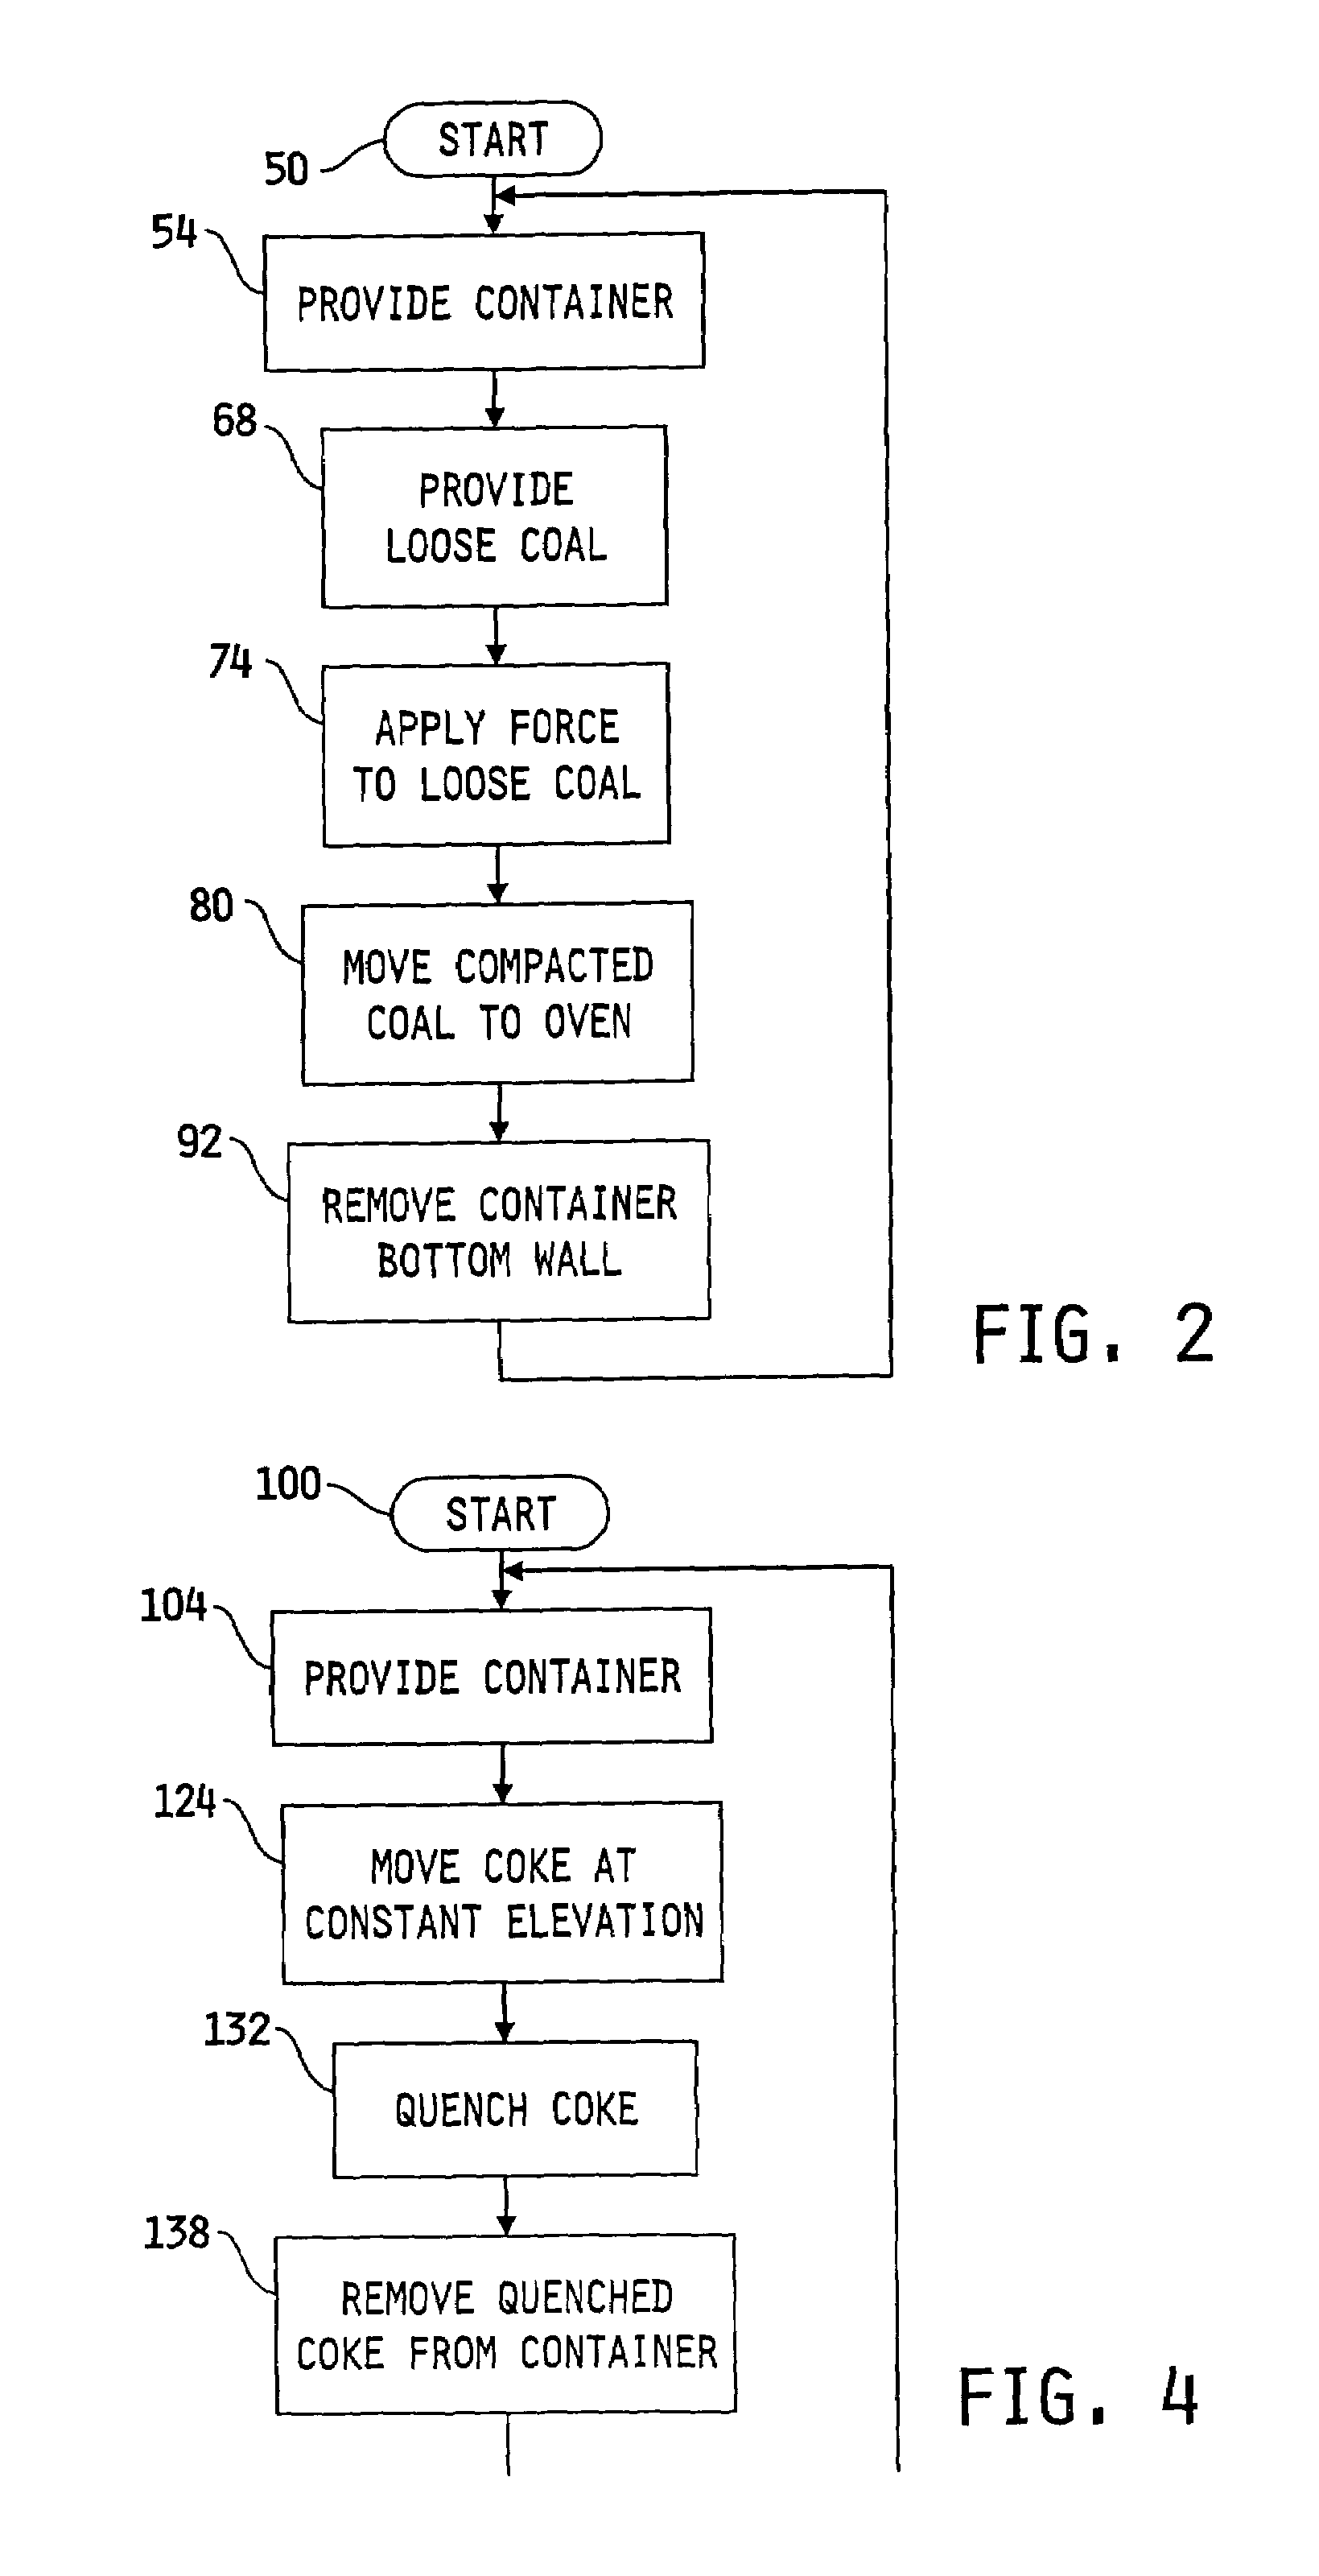 Method for producing blast furnace coke through coal compaction in a non-recovery or heat recovery type oven